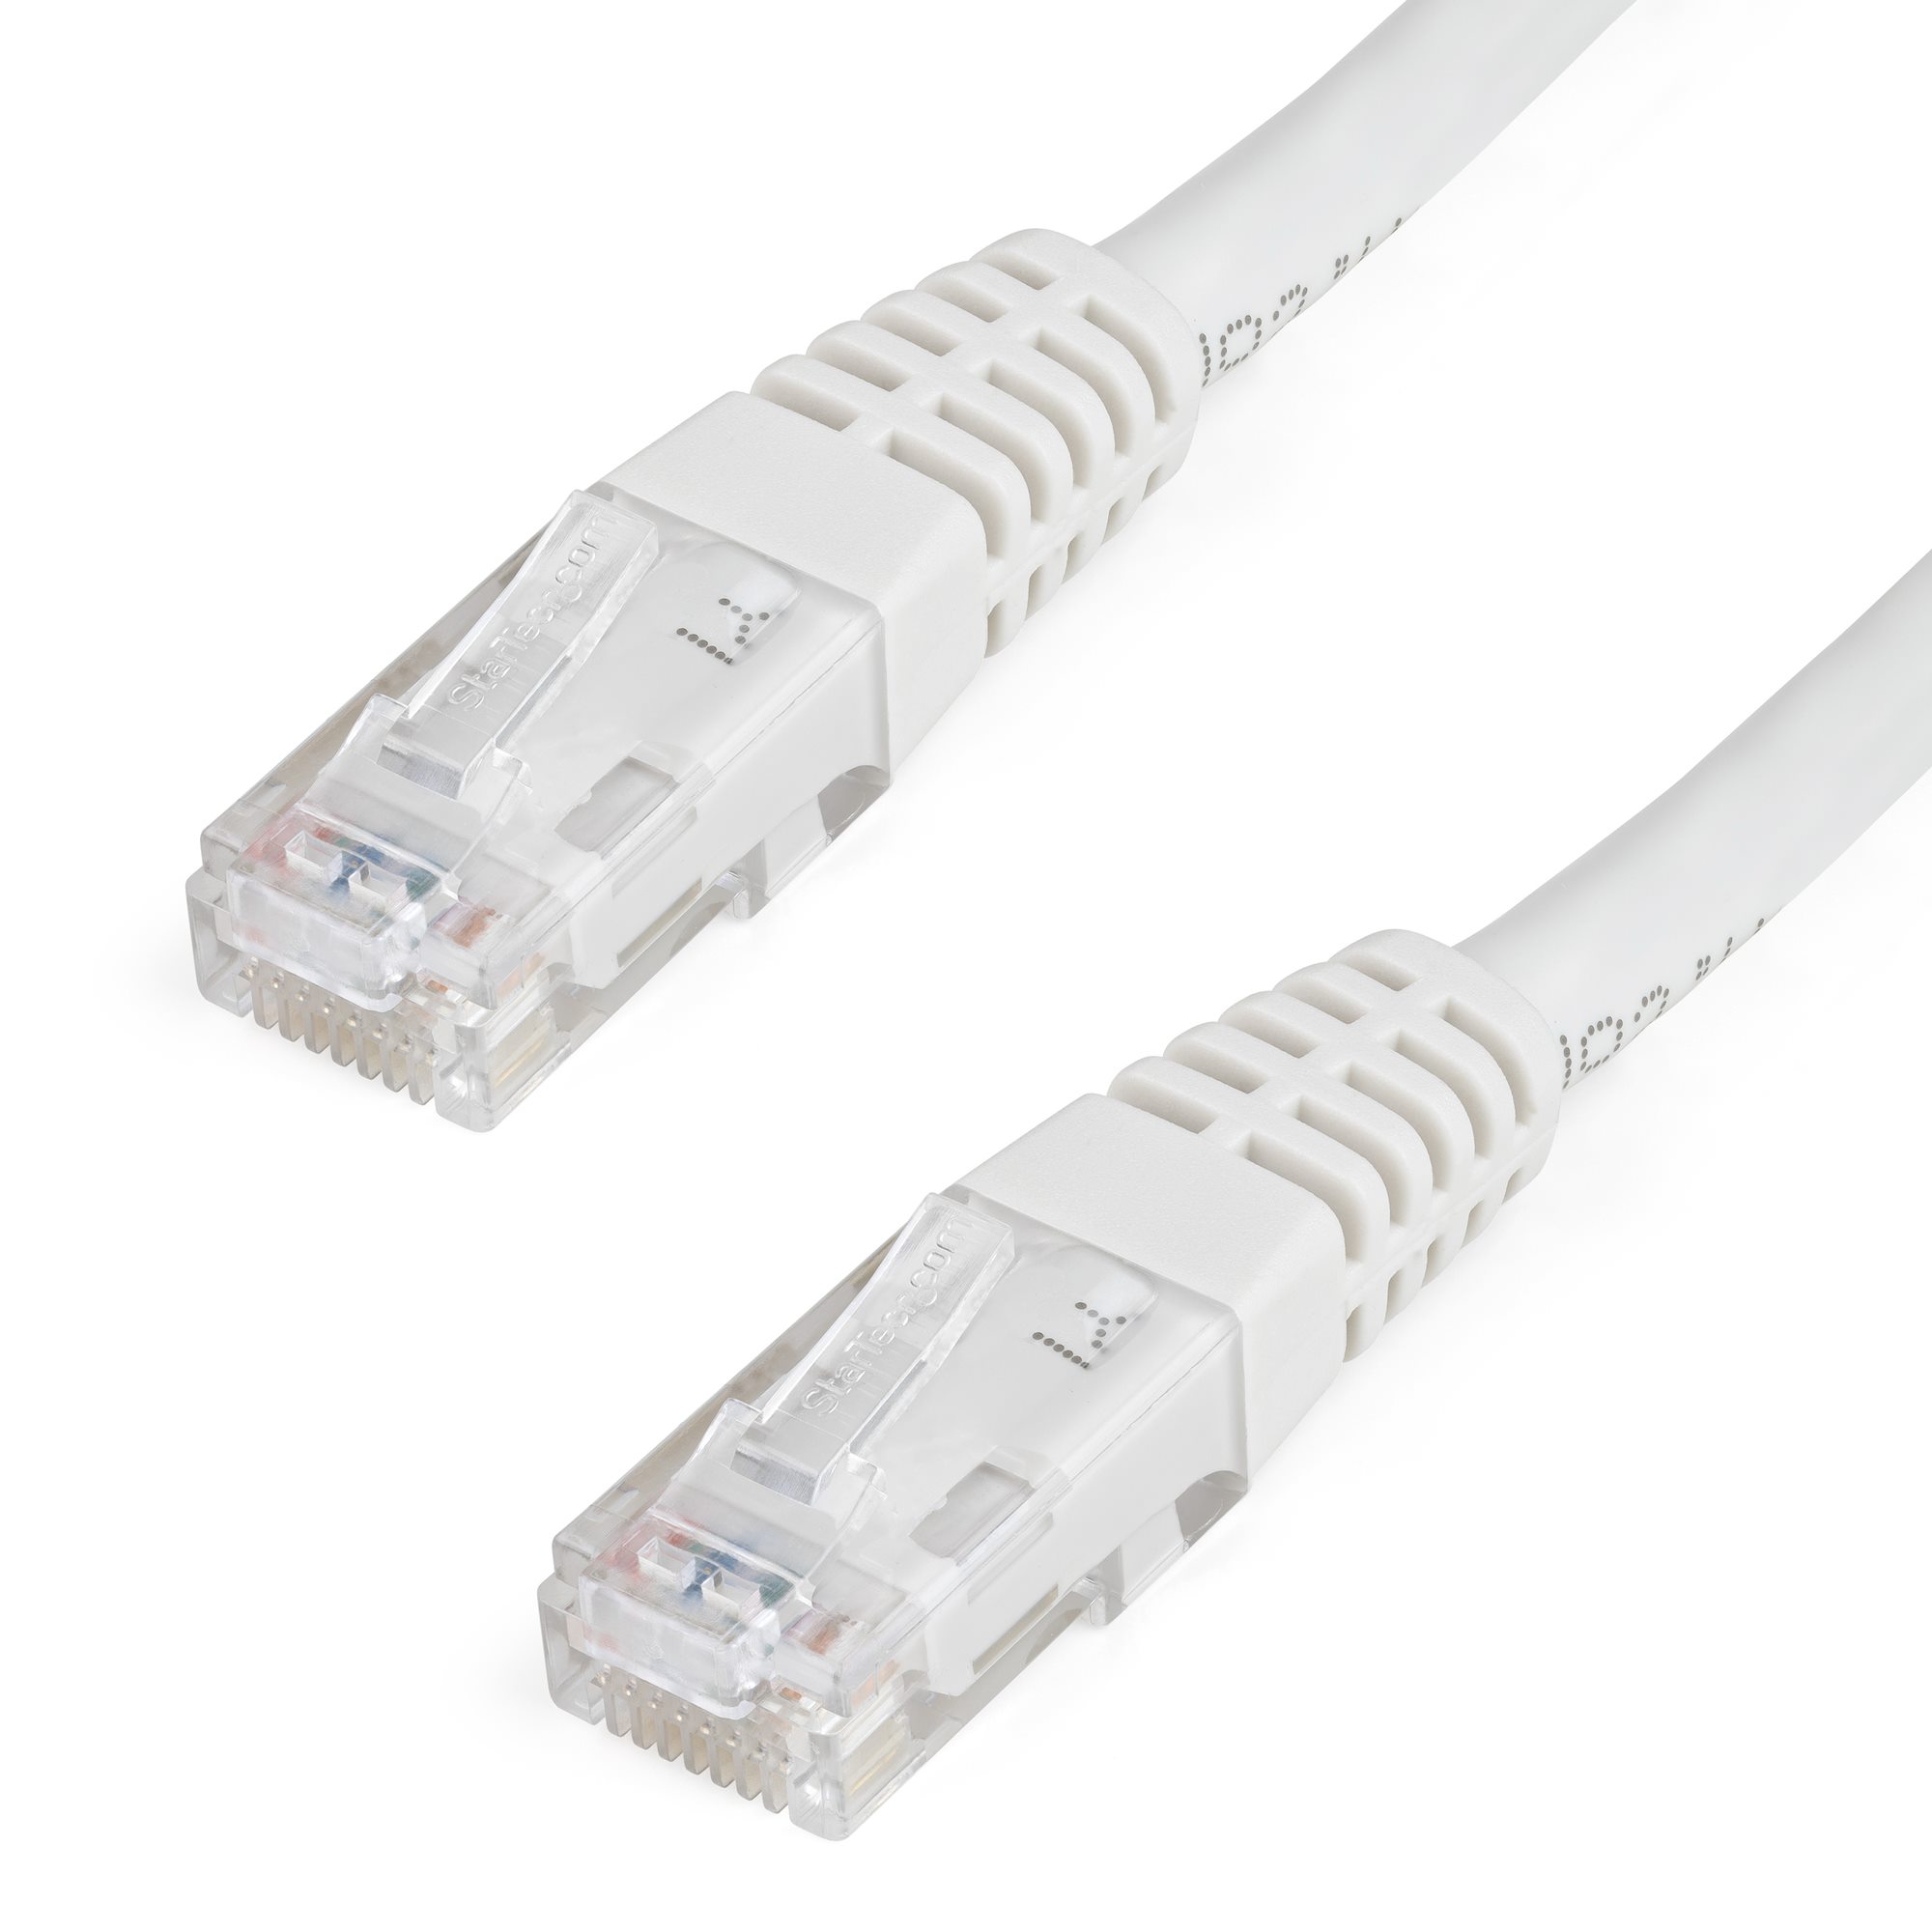 CAT6 ETHERNET PATCH CABLE 25FT WHITE CATEGORY 6 ROUTER CORD 25' SNAGLESS RJ45 